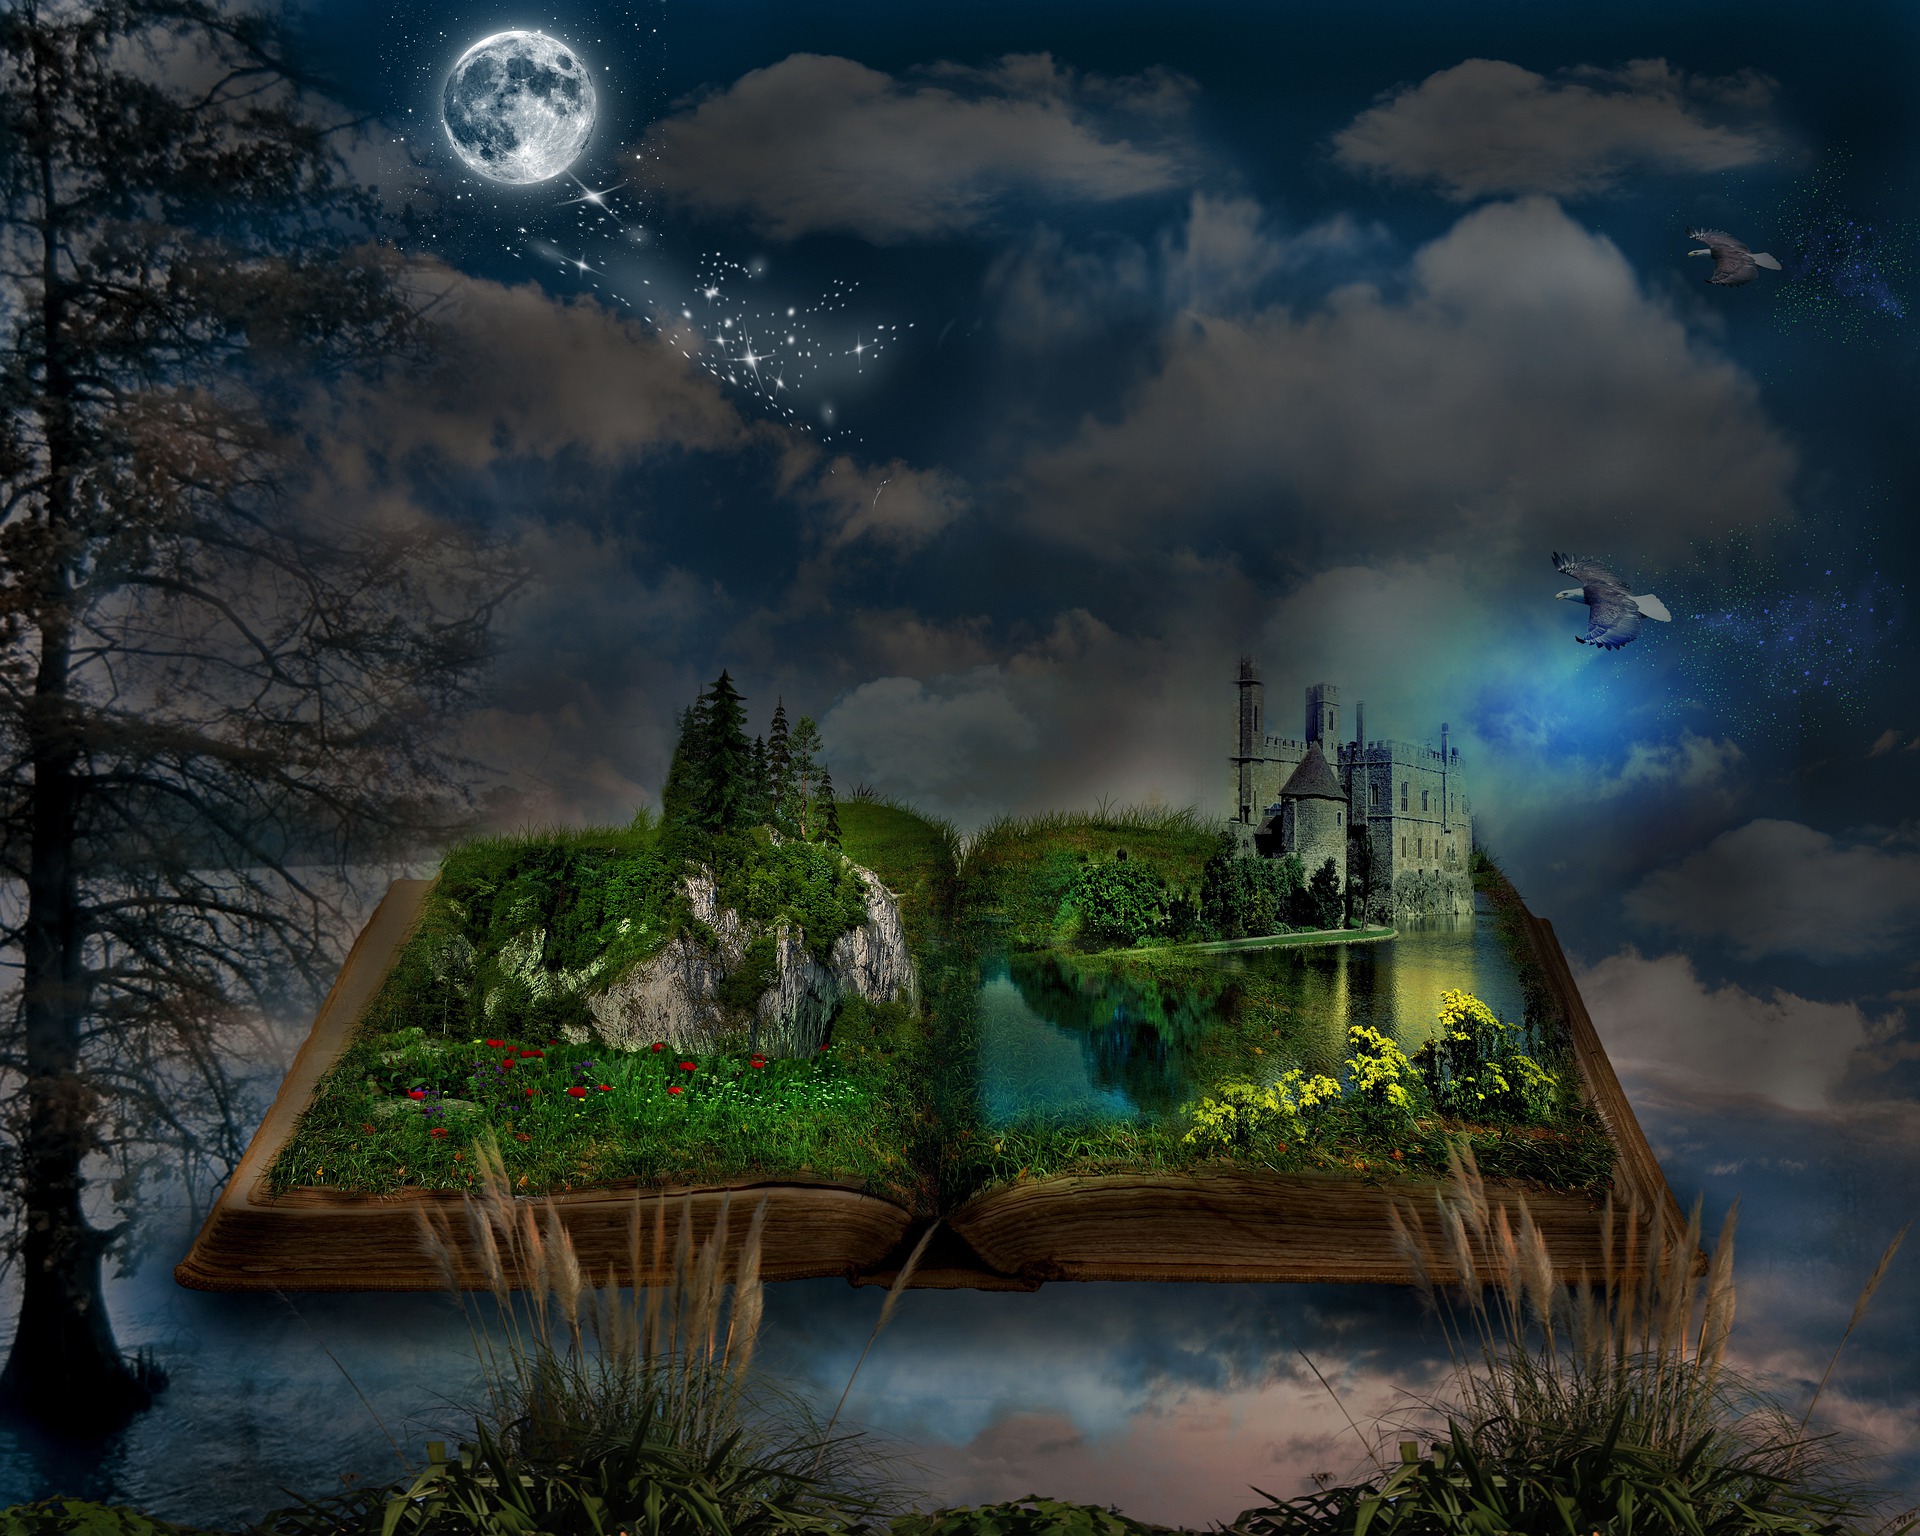 A fantasy image of a sky with clouds, stars and full moon. A book covers the lower part of the image. From the book emerge nature images, flowers, trees, a castle. All the imagery is real, not printed. The book floats on a magical lake.